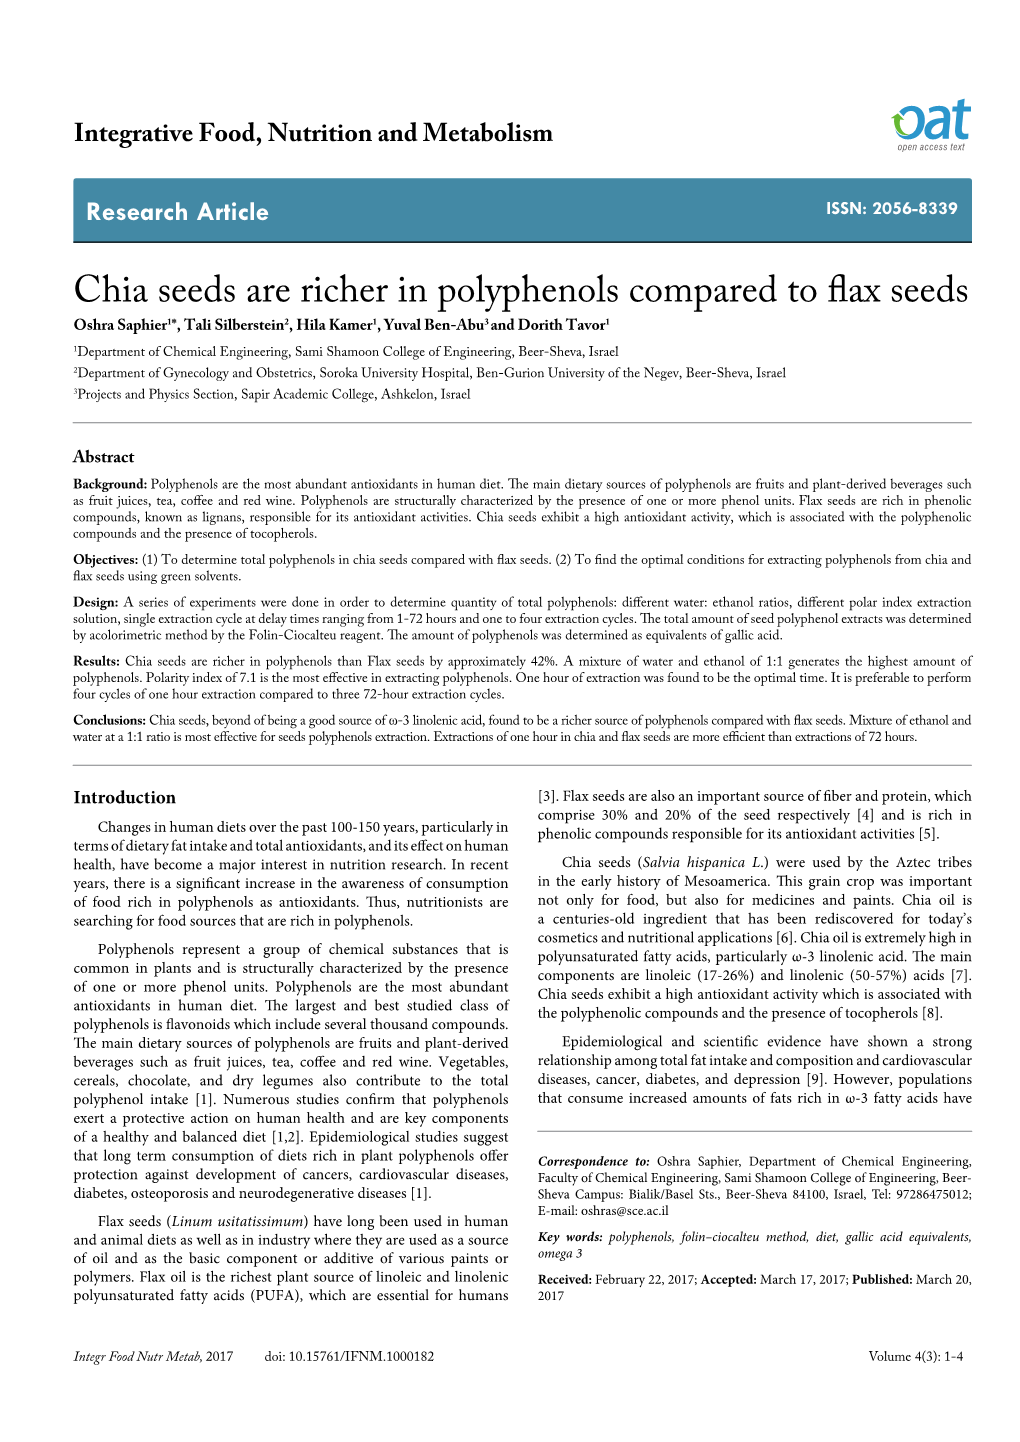 Chia Seeds Are Richer in Polyphenols Compared to Flax Seeds